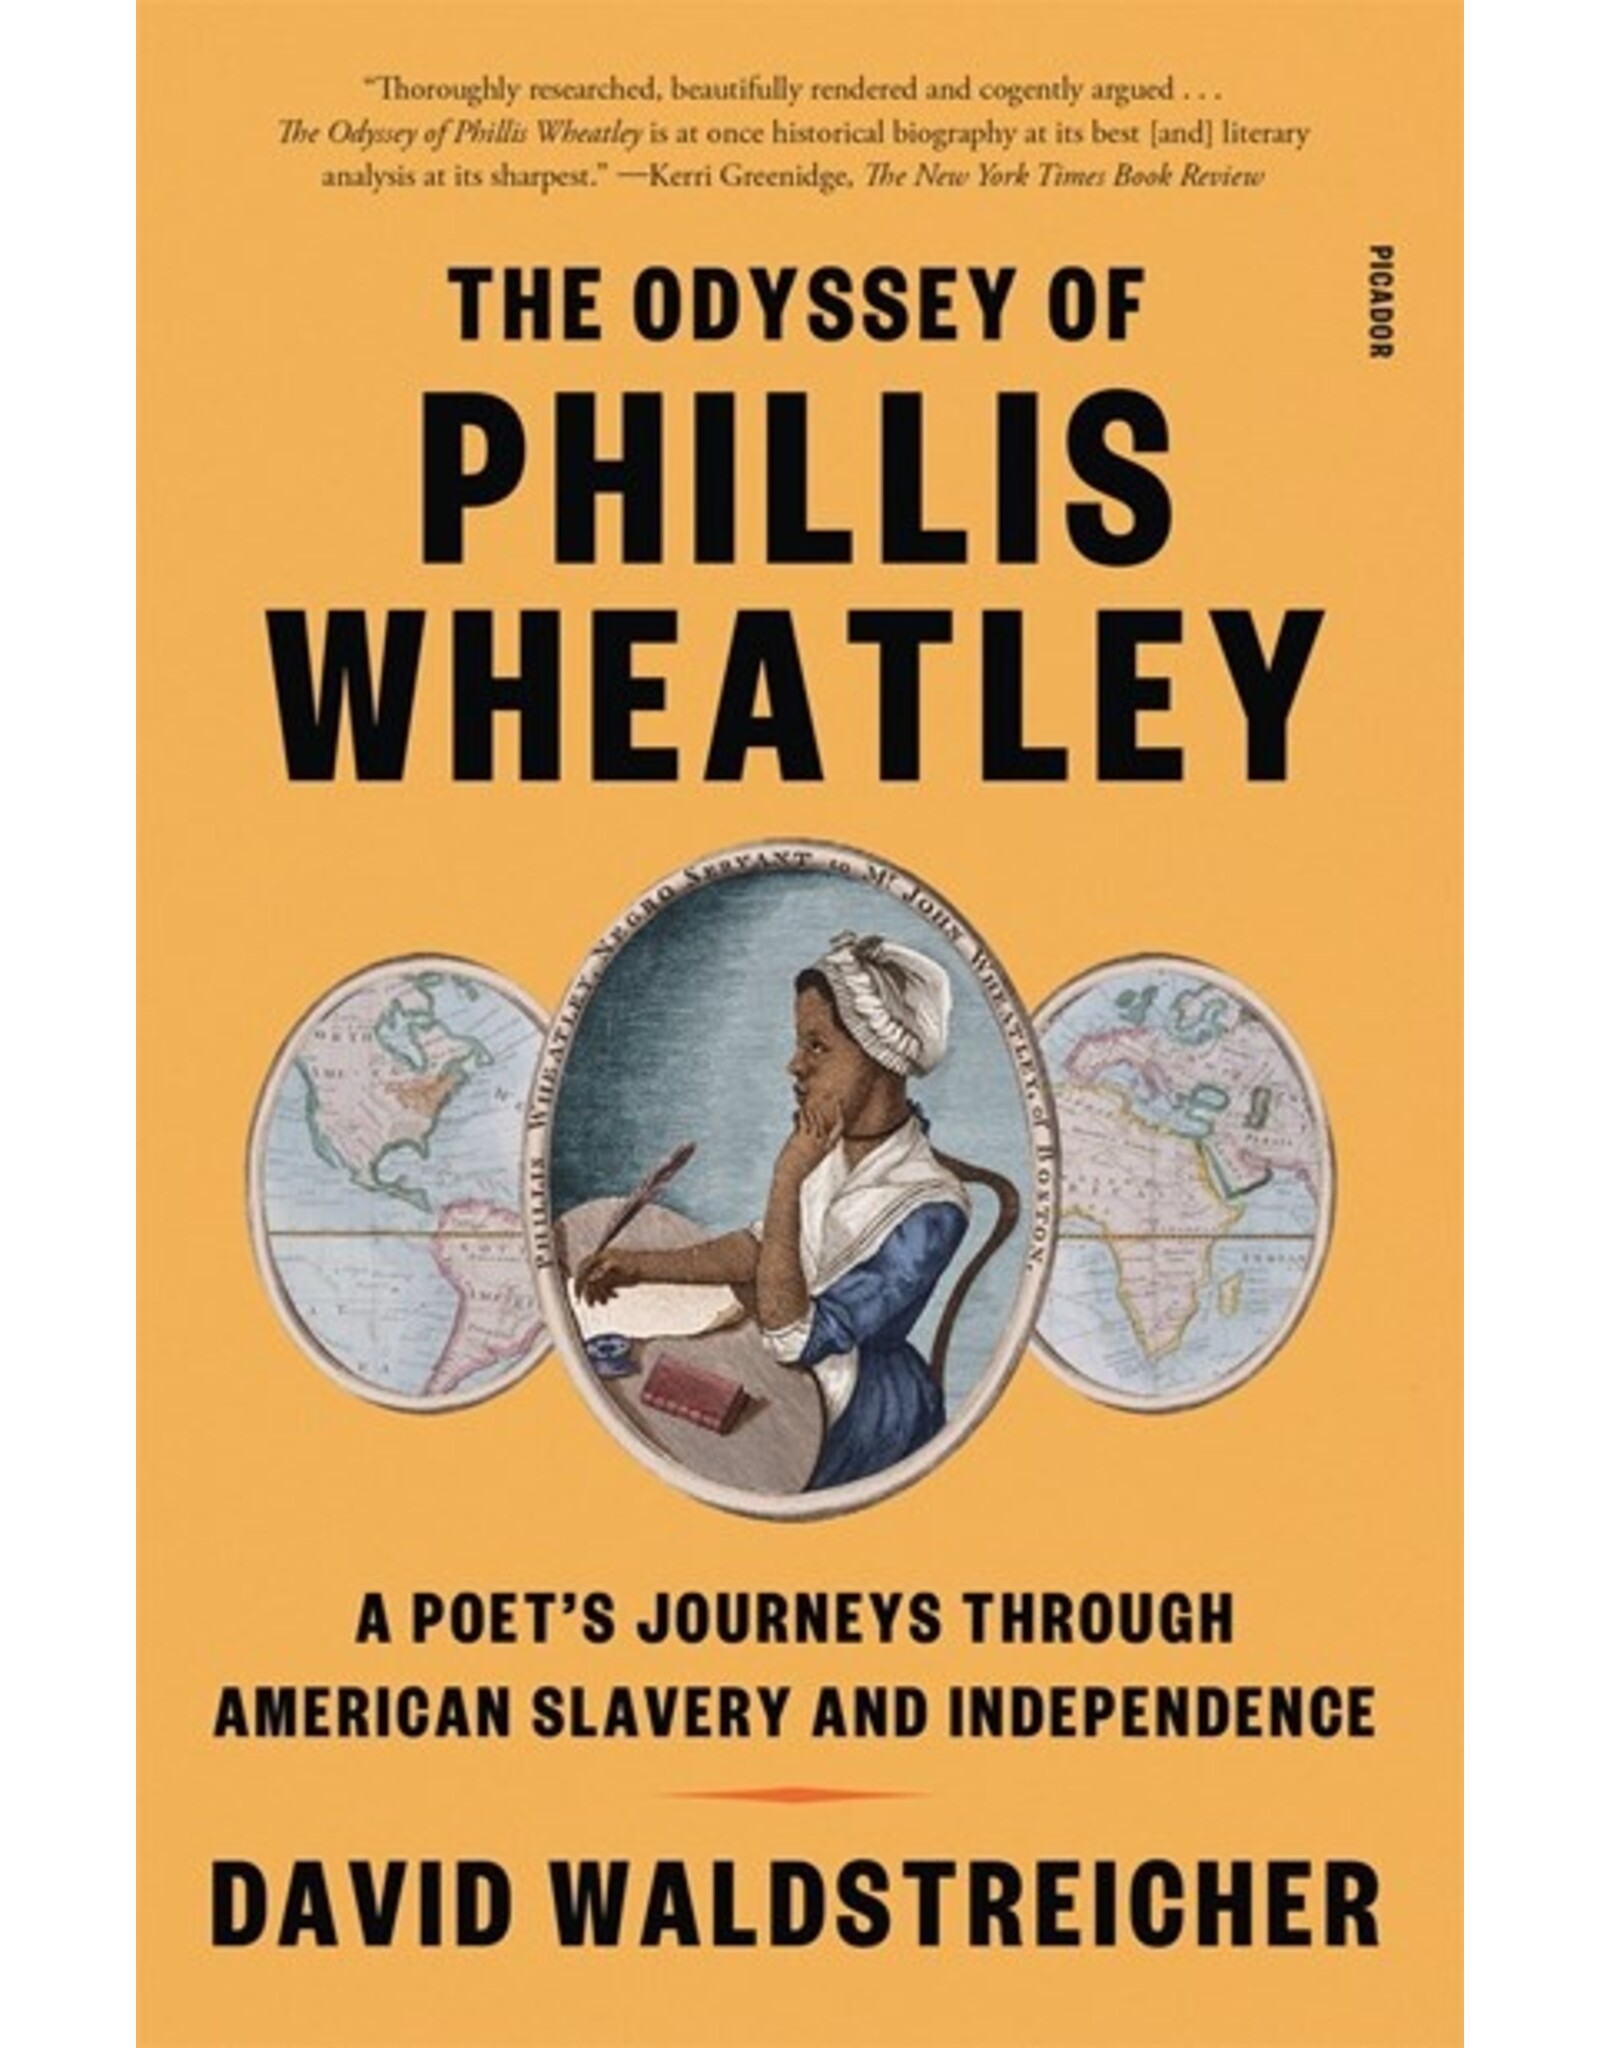 Books The Odyssey of Phillis Wheatley : A Poet's Journey Through American Slavery and Independence by David Waldstreicher